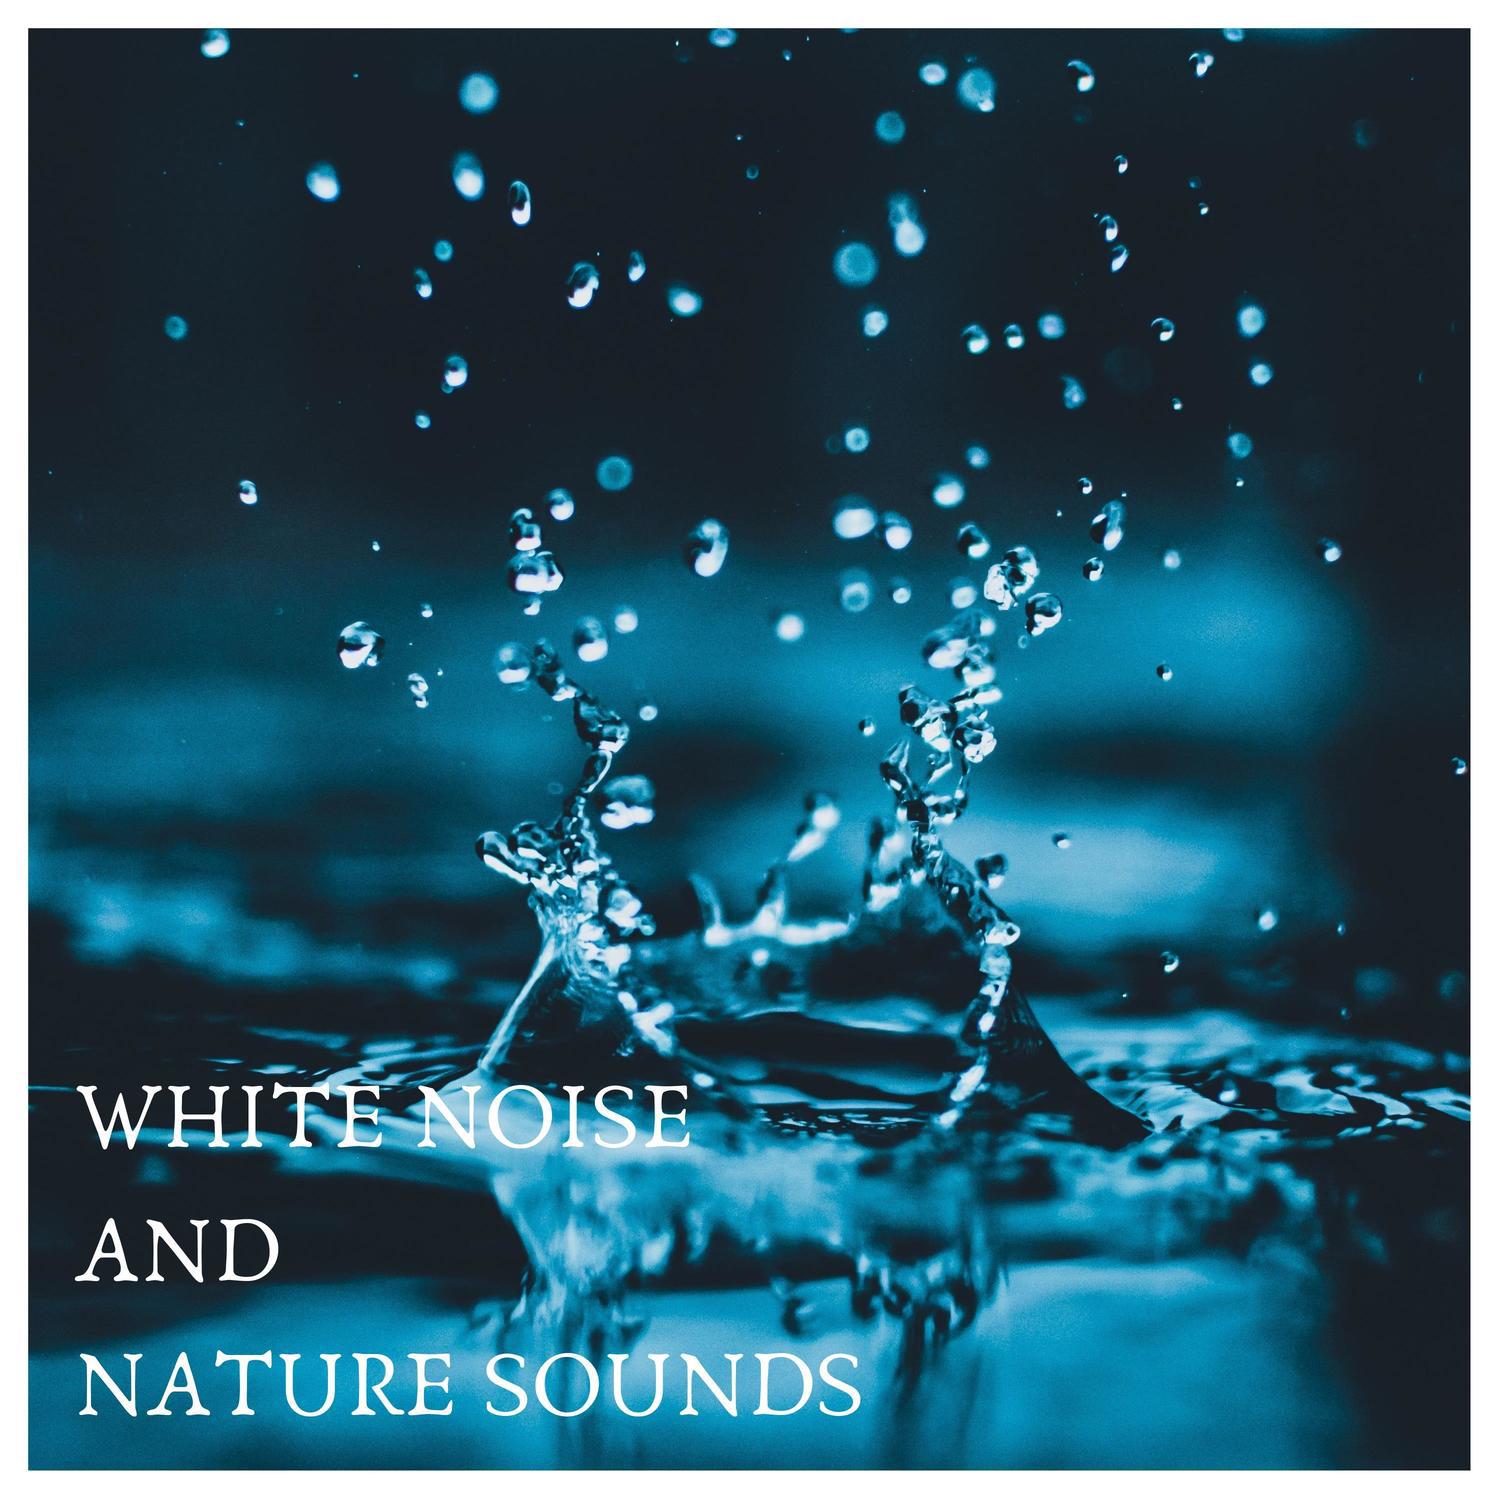 Sounds of Nature and White Noise for Sleep. Great Collection of Rain, Storm, Ocean, White Noise and Brown Noise for Baby Sleep